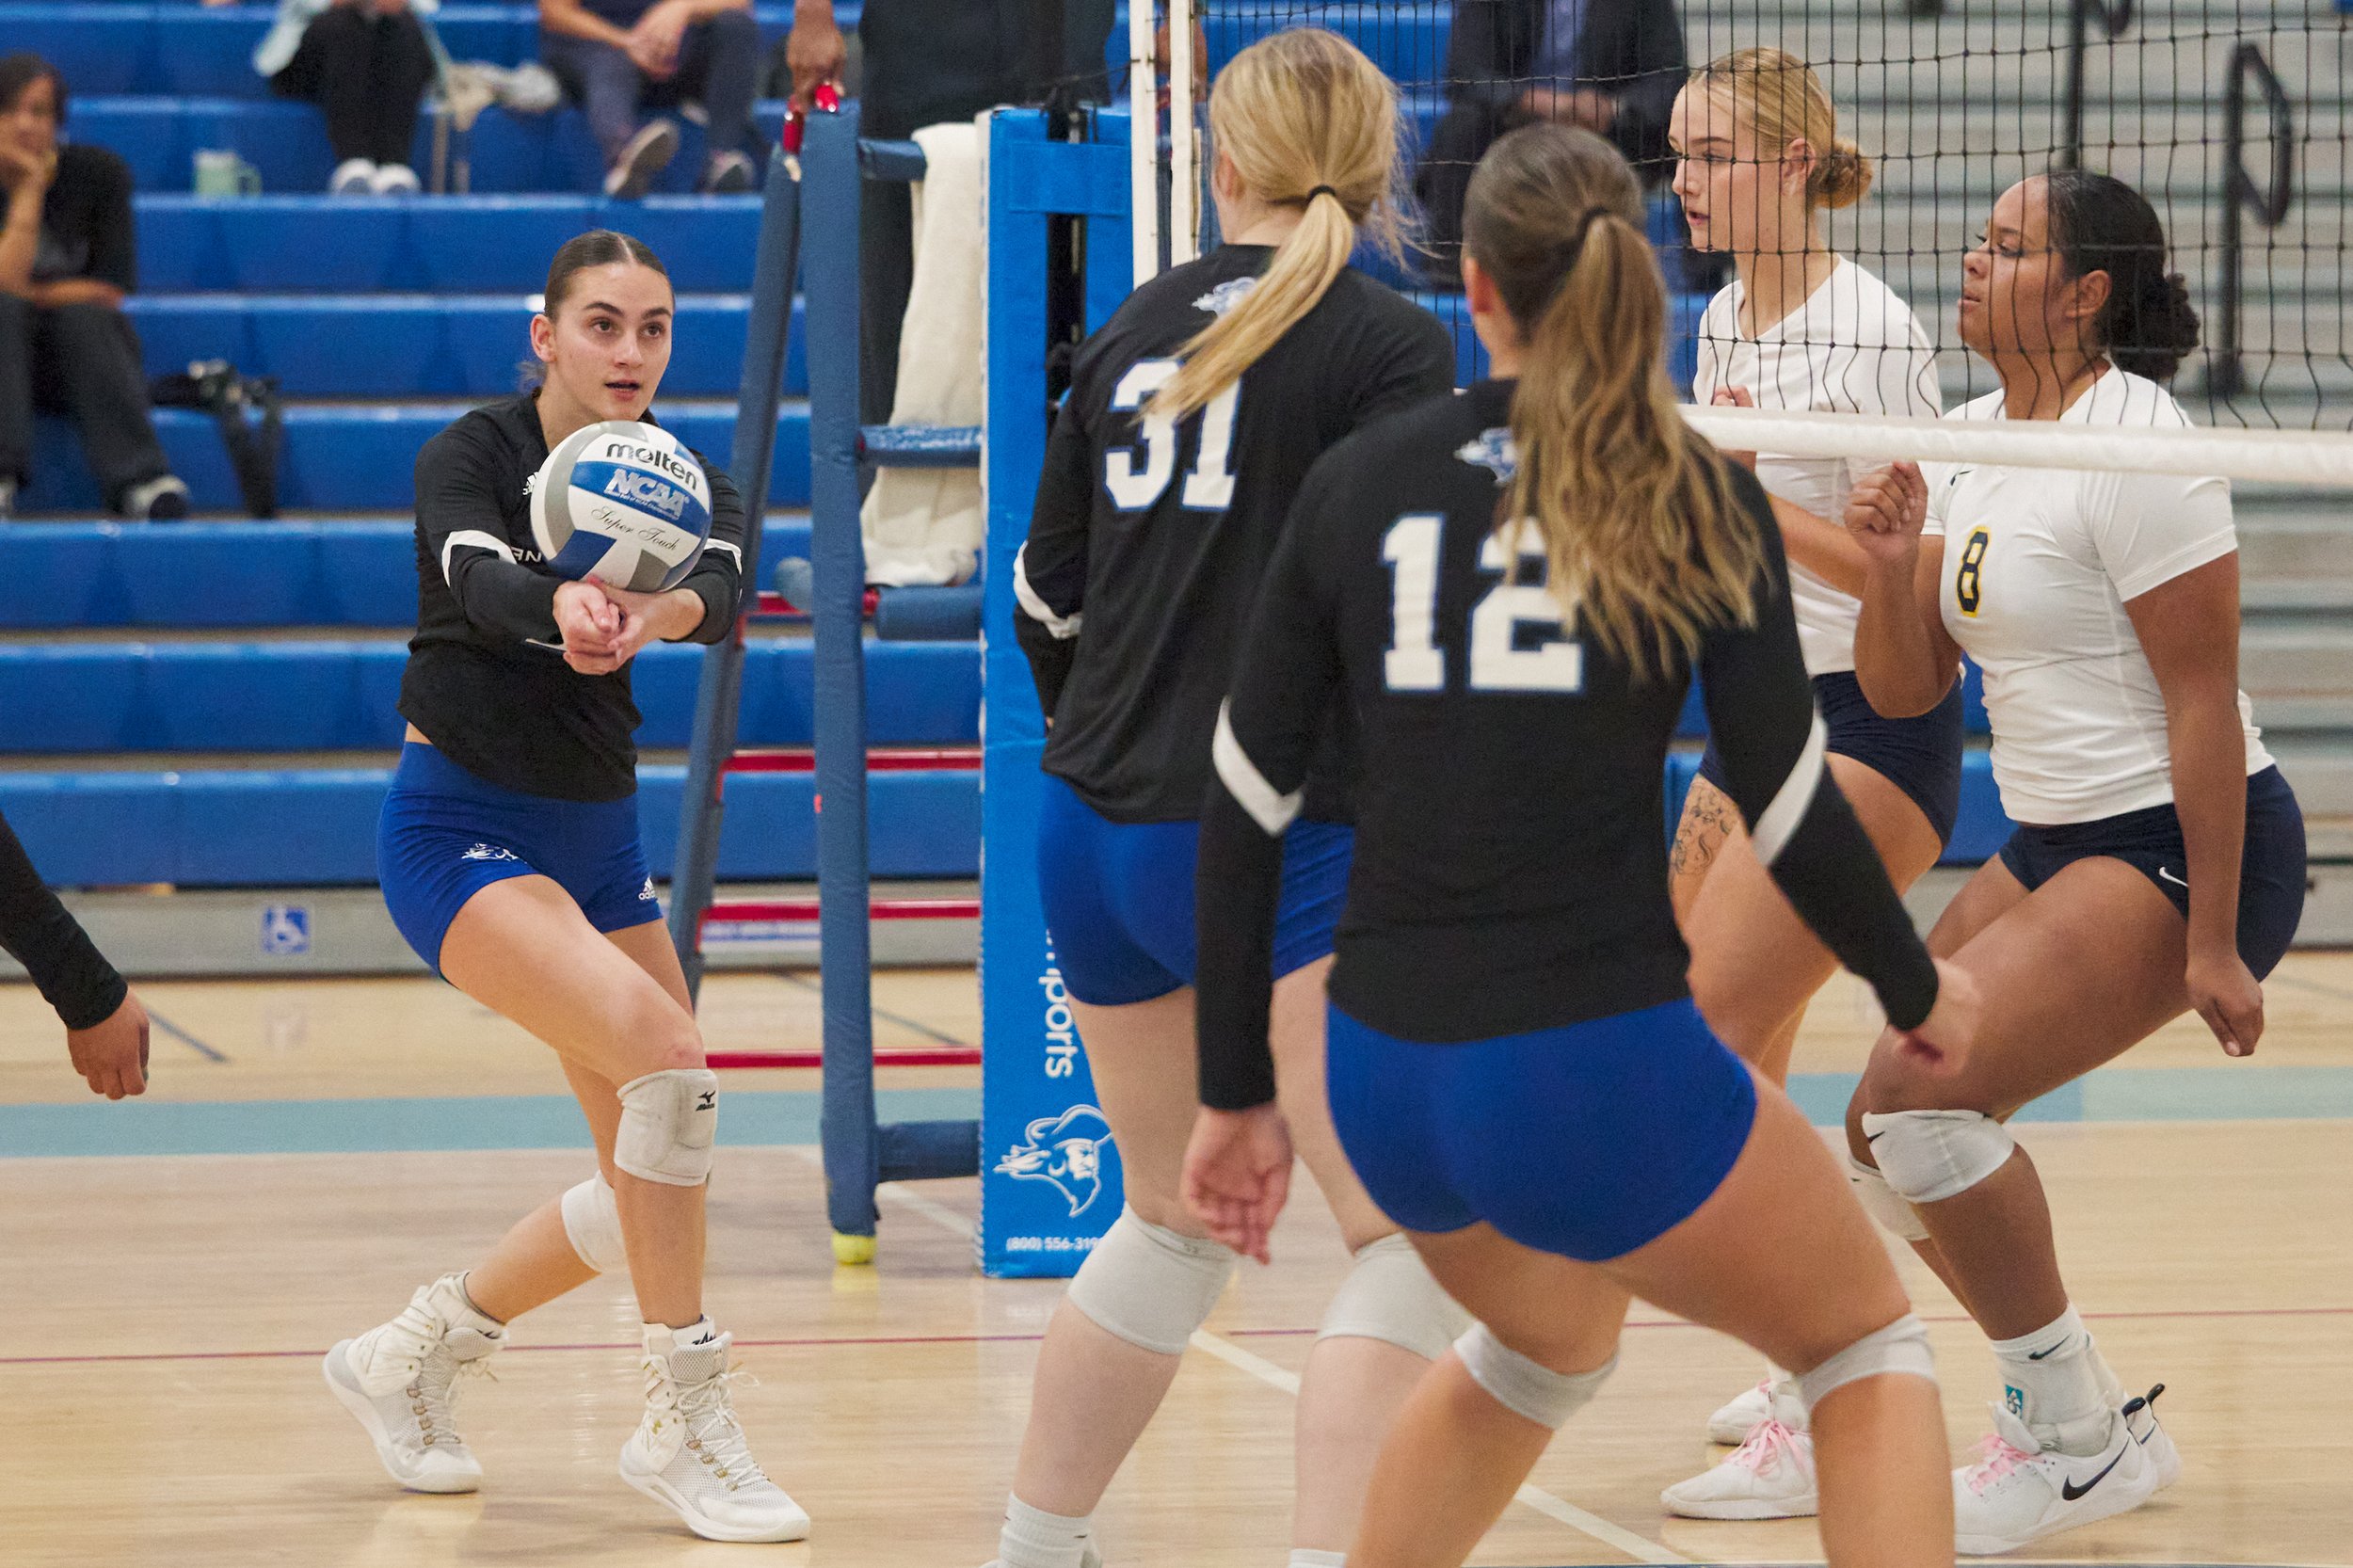  Santa Monica College Corsairs' outside hitter Prior Borick bumps the ball during the women's volleyball match against the College of the Canyons Cougars on Friday, Oct. 27, 2023, at Corsair Gym in Santa Monica, Calif. The Corsairs won 3-0. (Nicholas